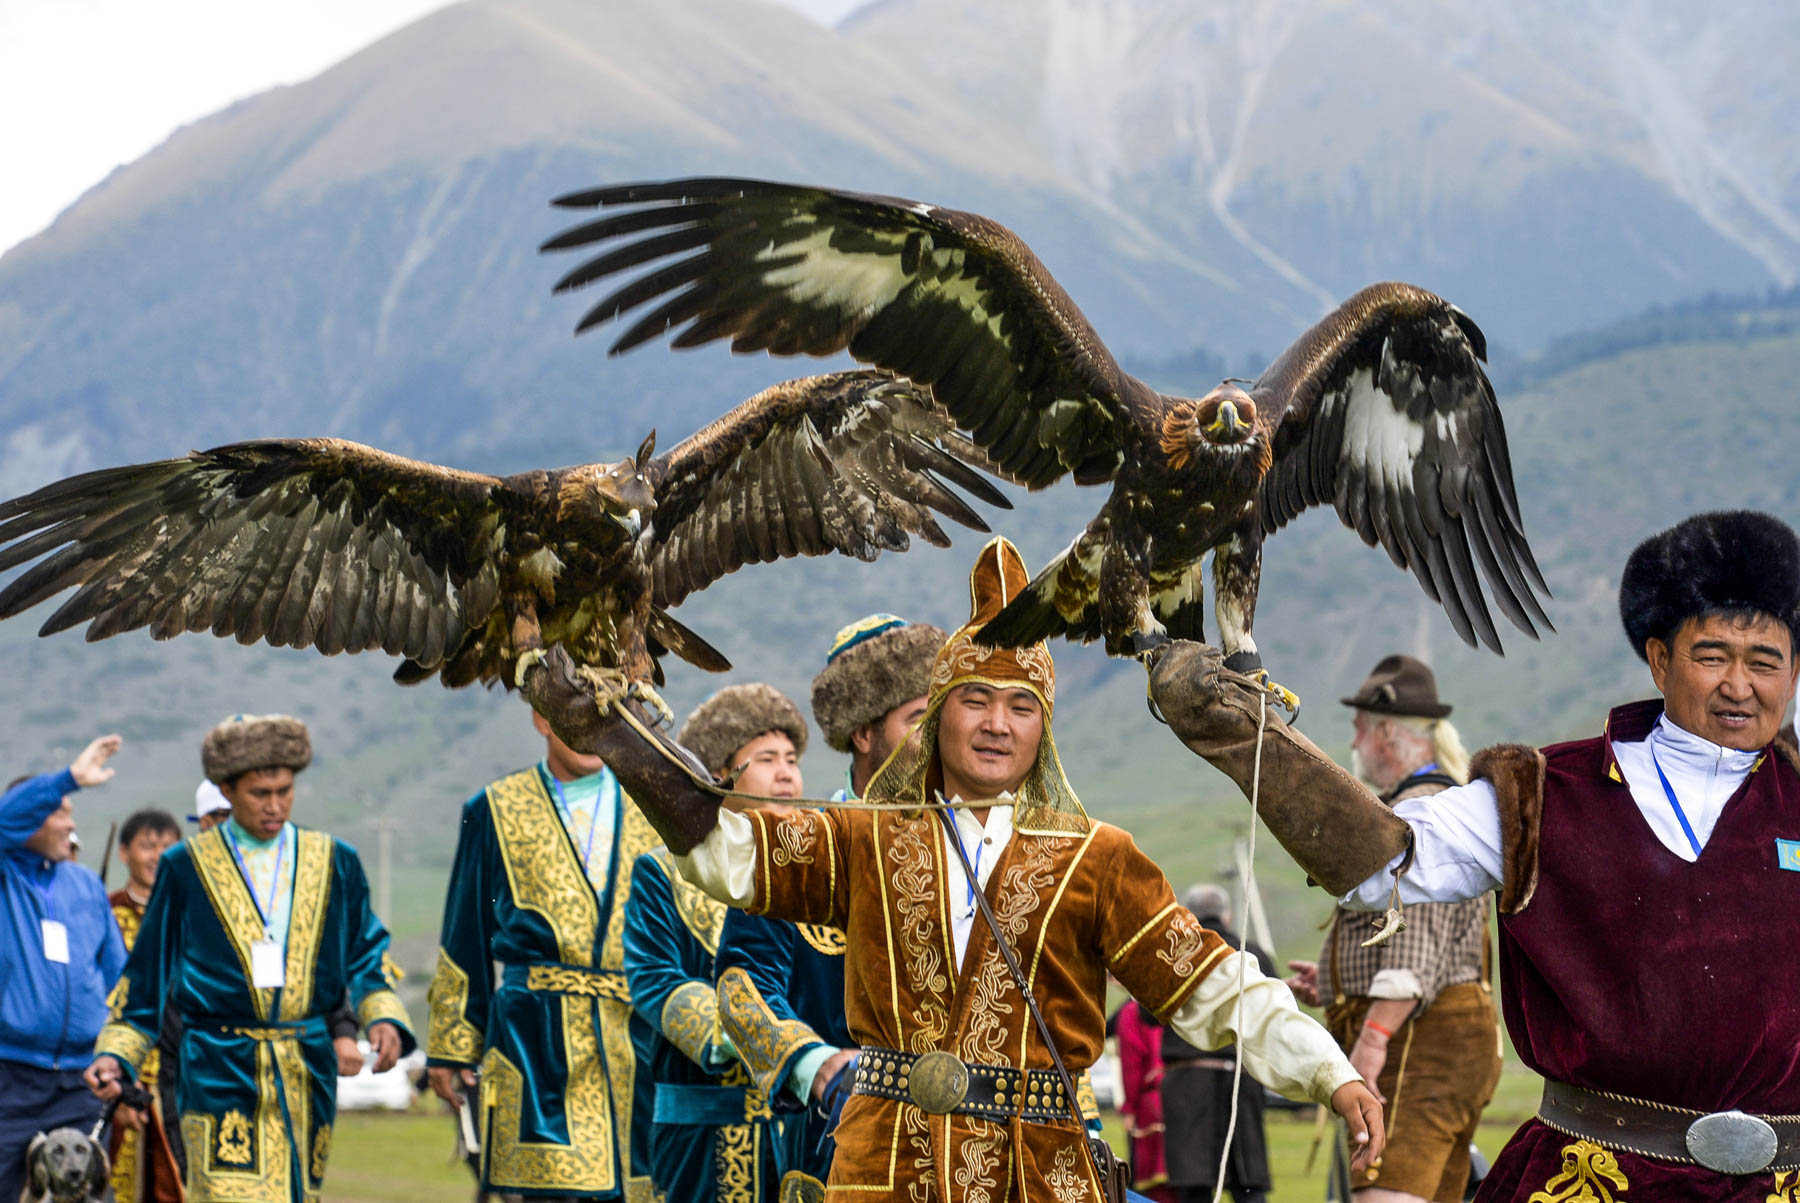 The history of the World Nomad Games